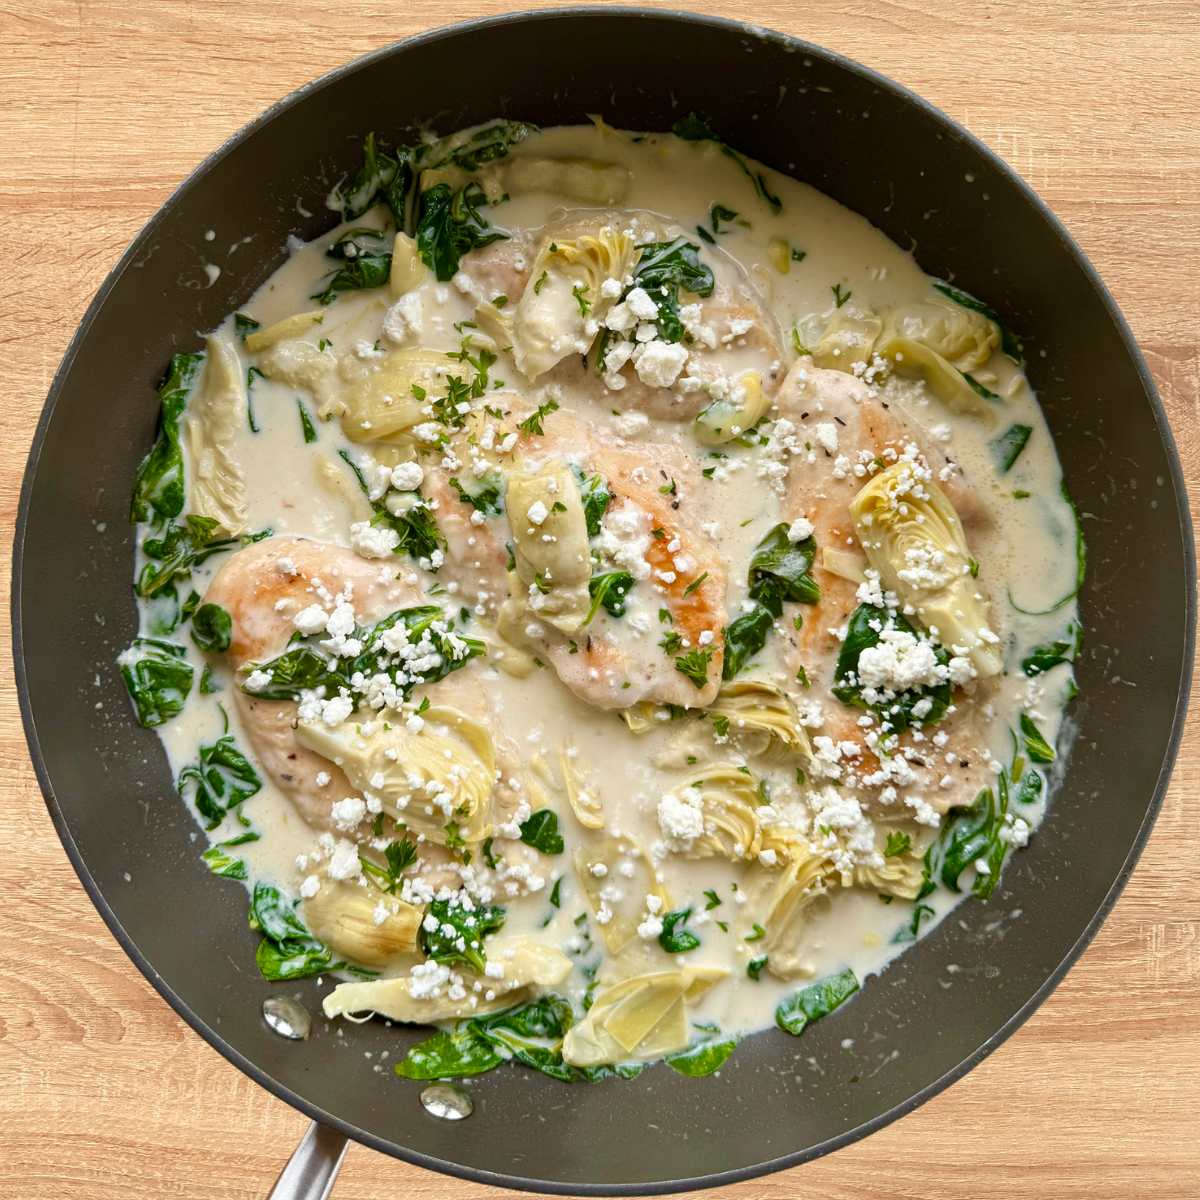 Spinach artichoke chicken in a skillet covered in a creamy lemon sauce and topped with goat cheese.